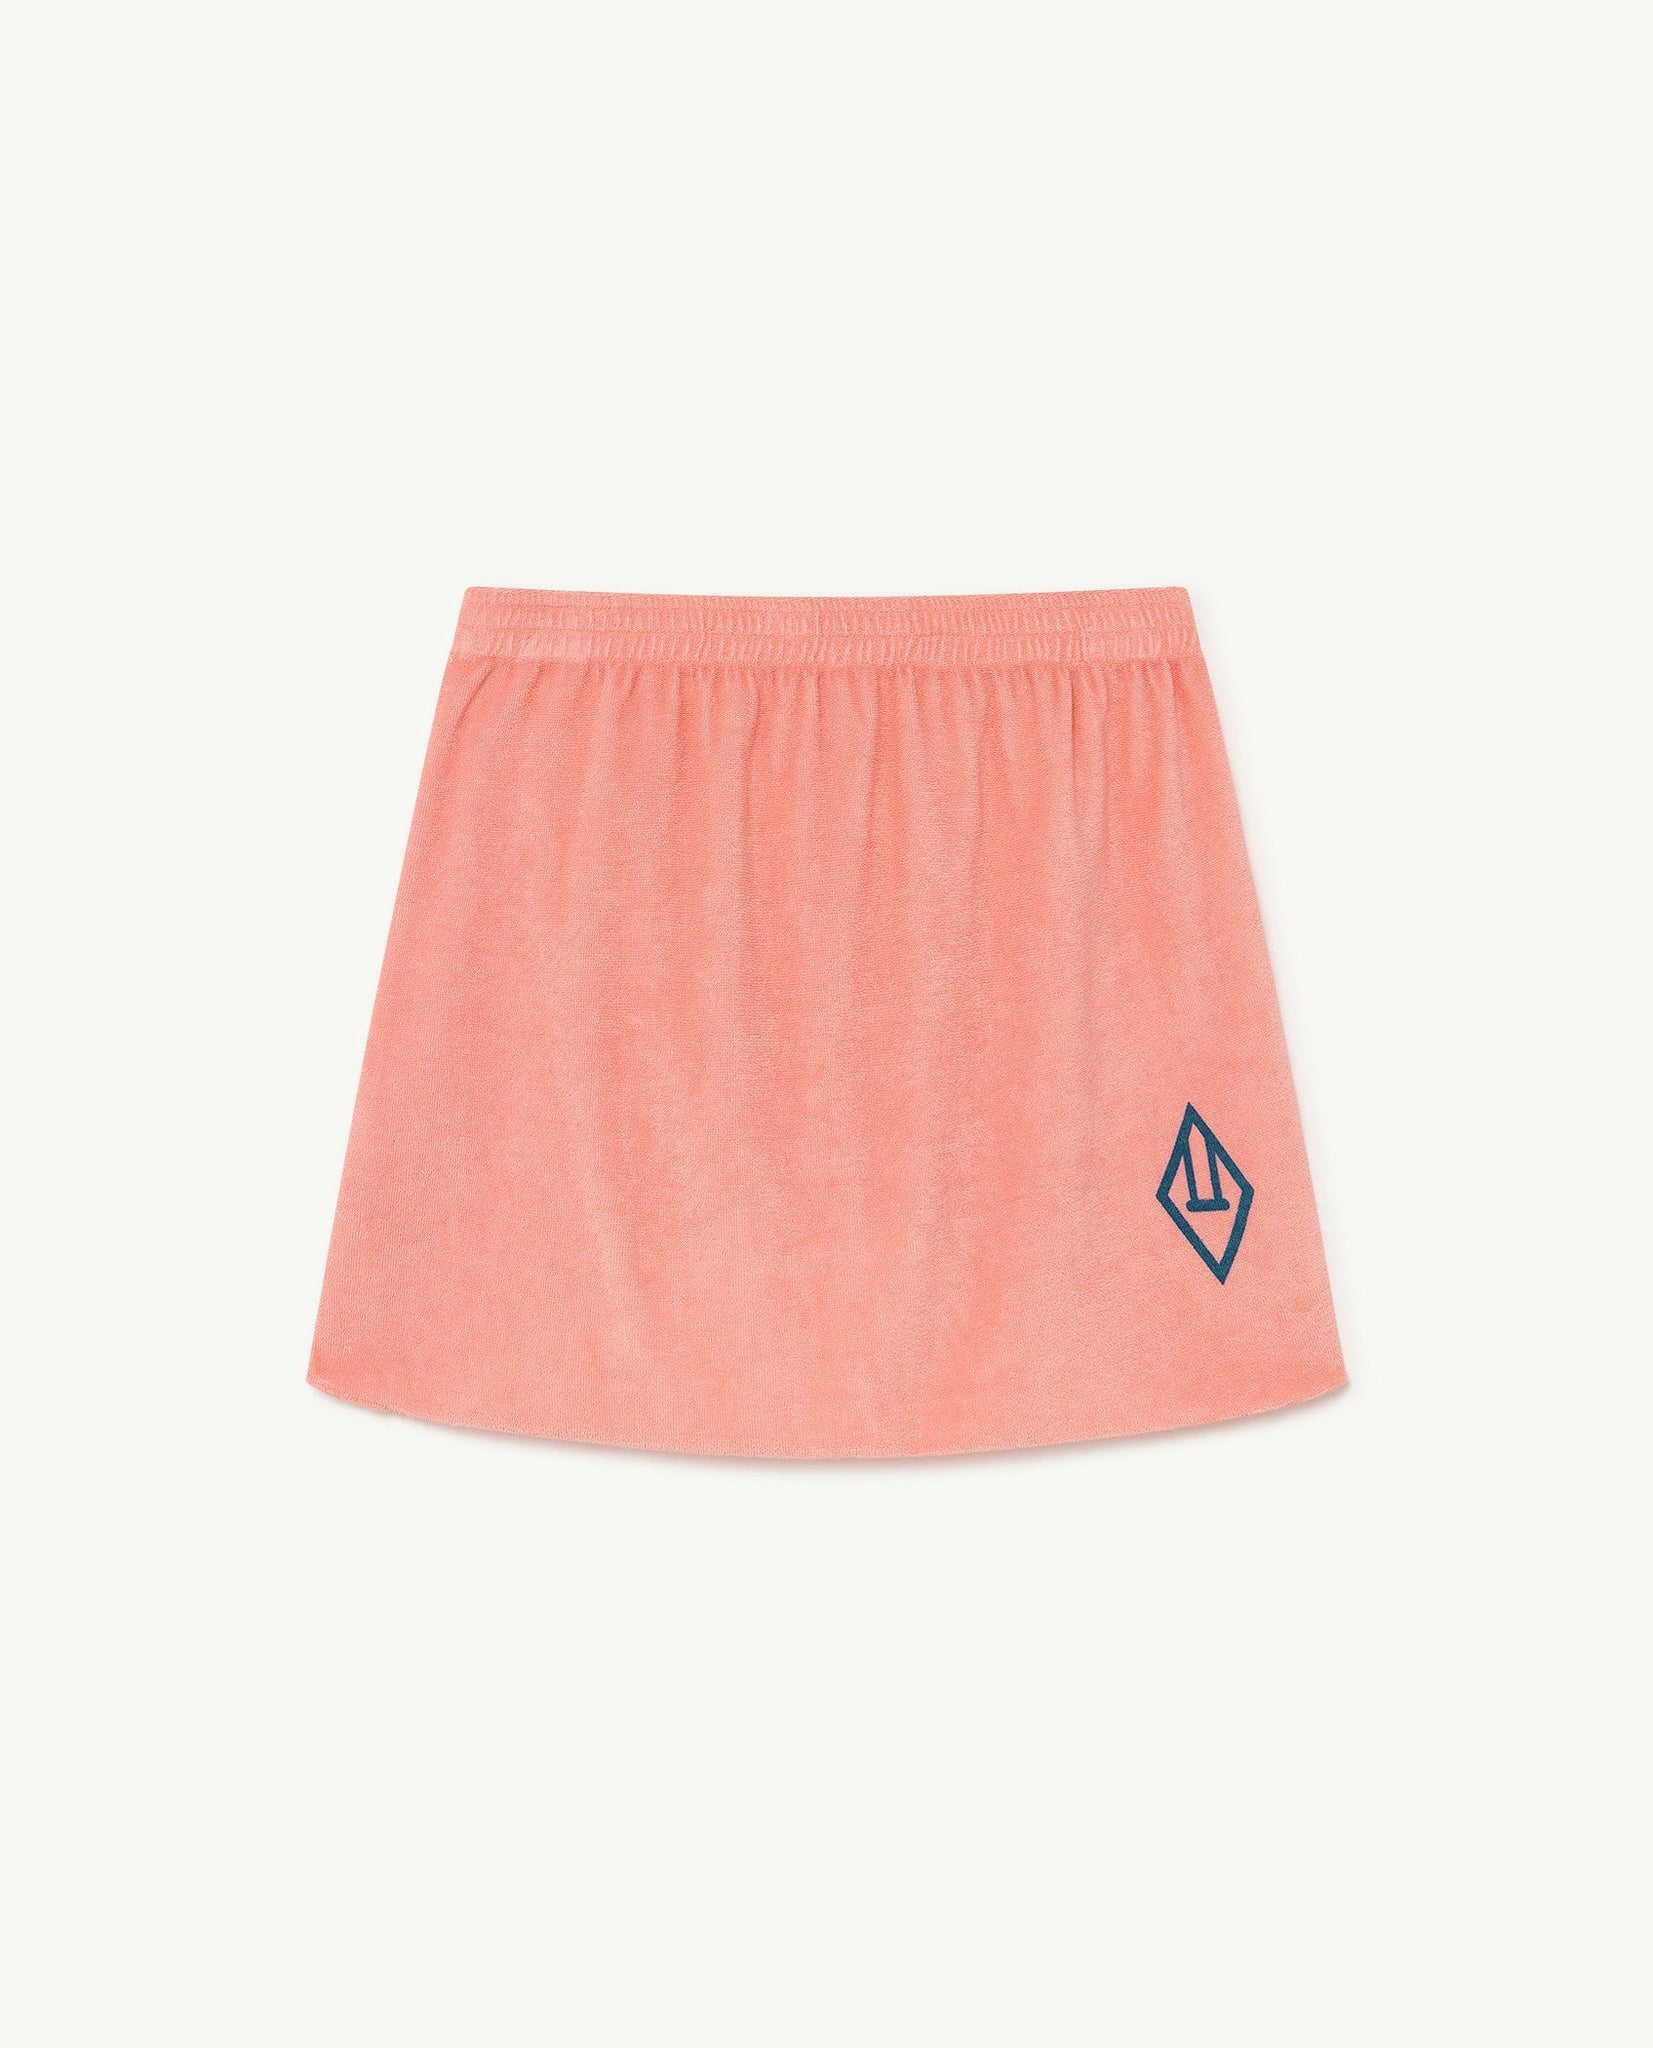 The Animal Observatory - Wombat Plain Terry Cloth Skirt - Pink